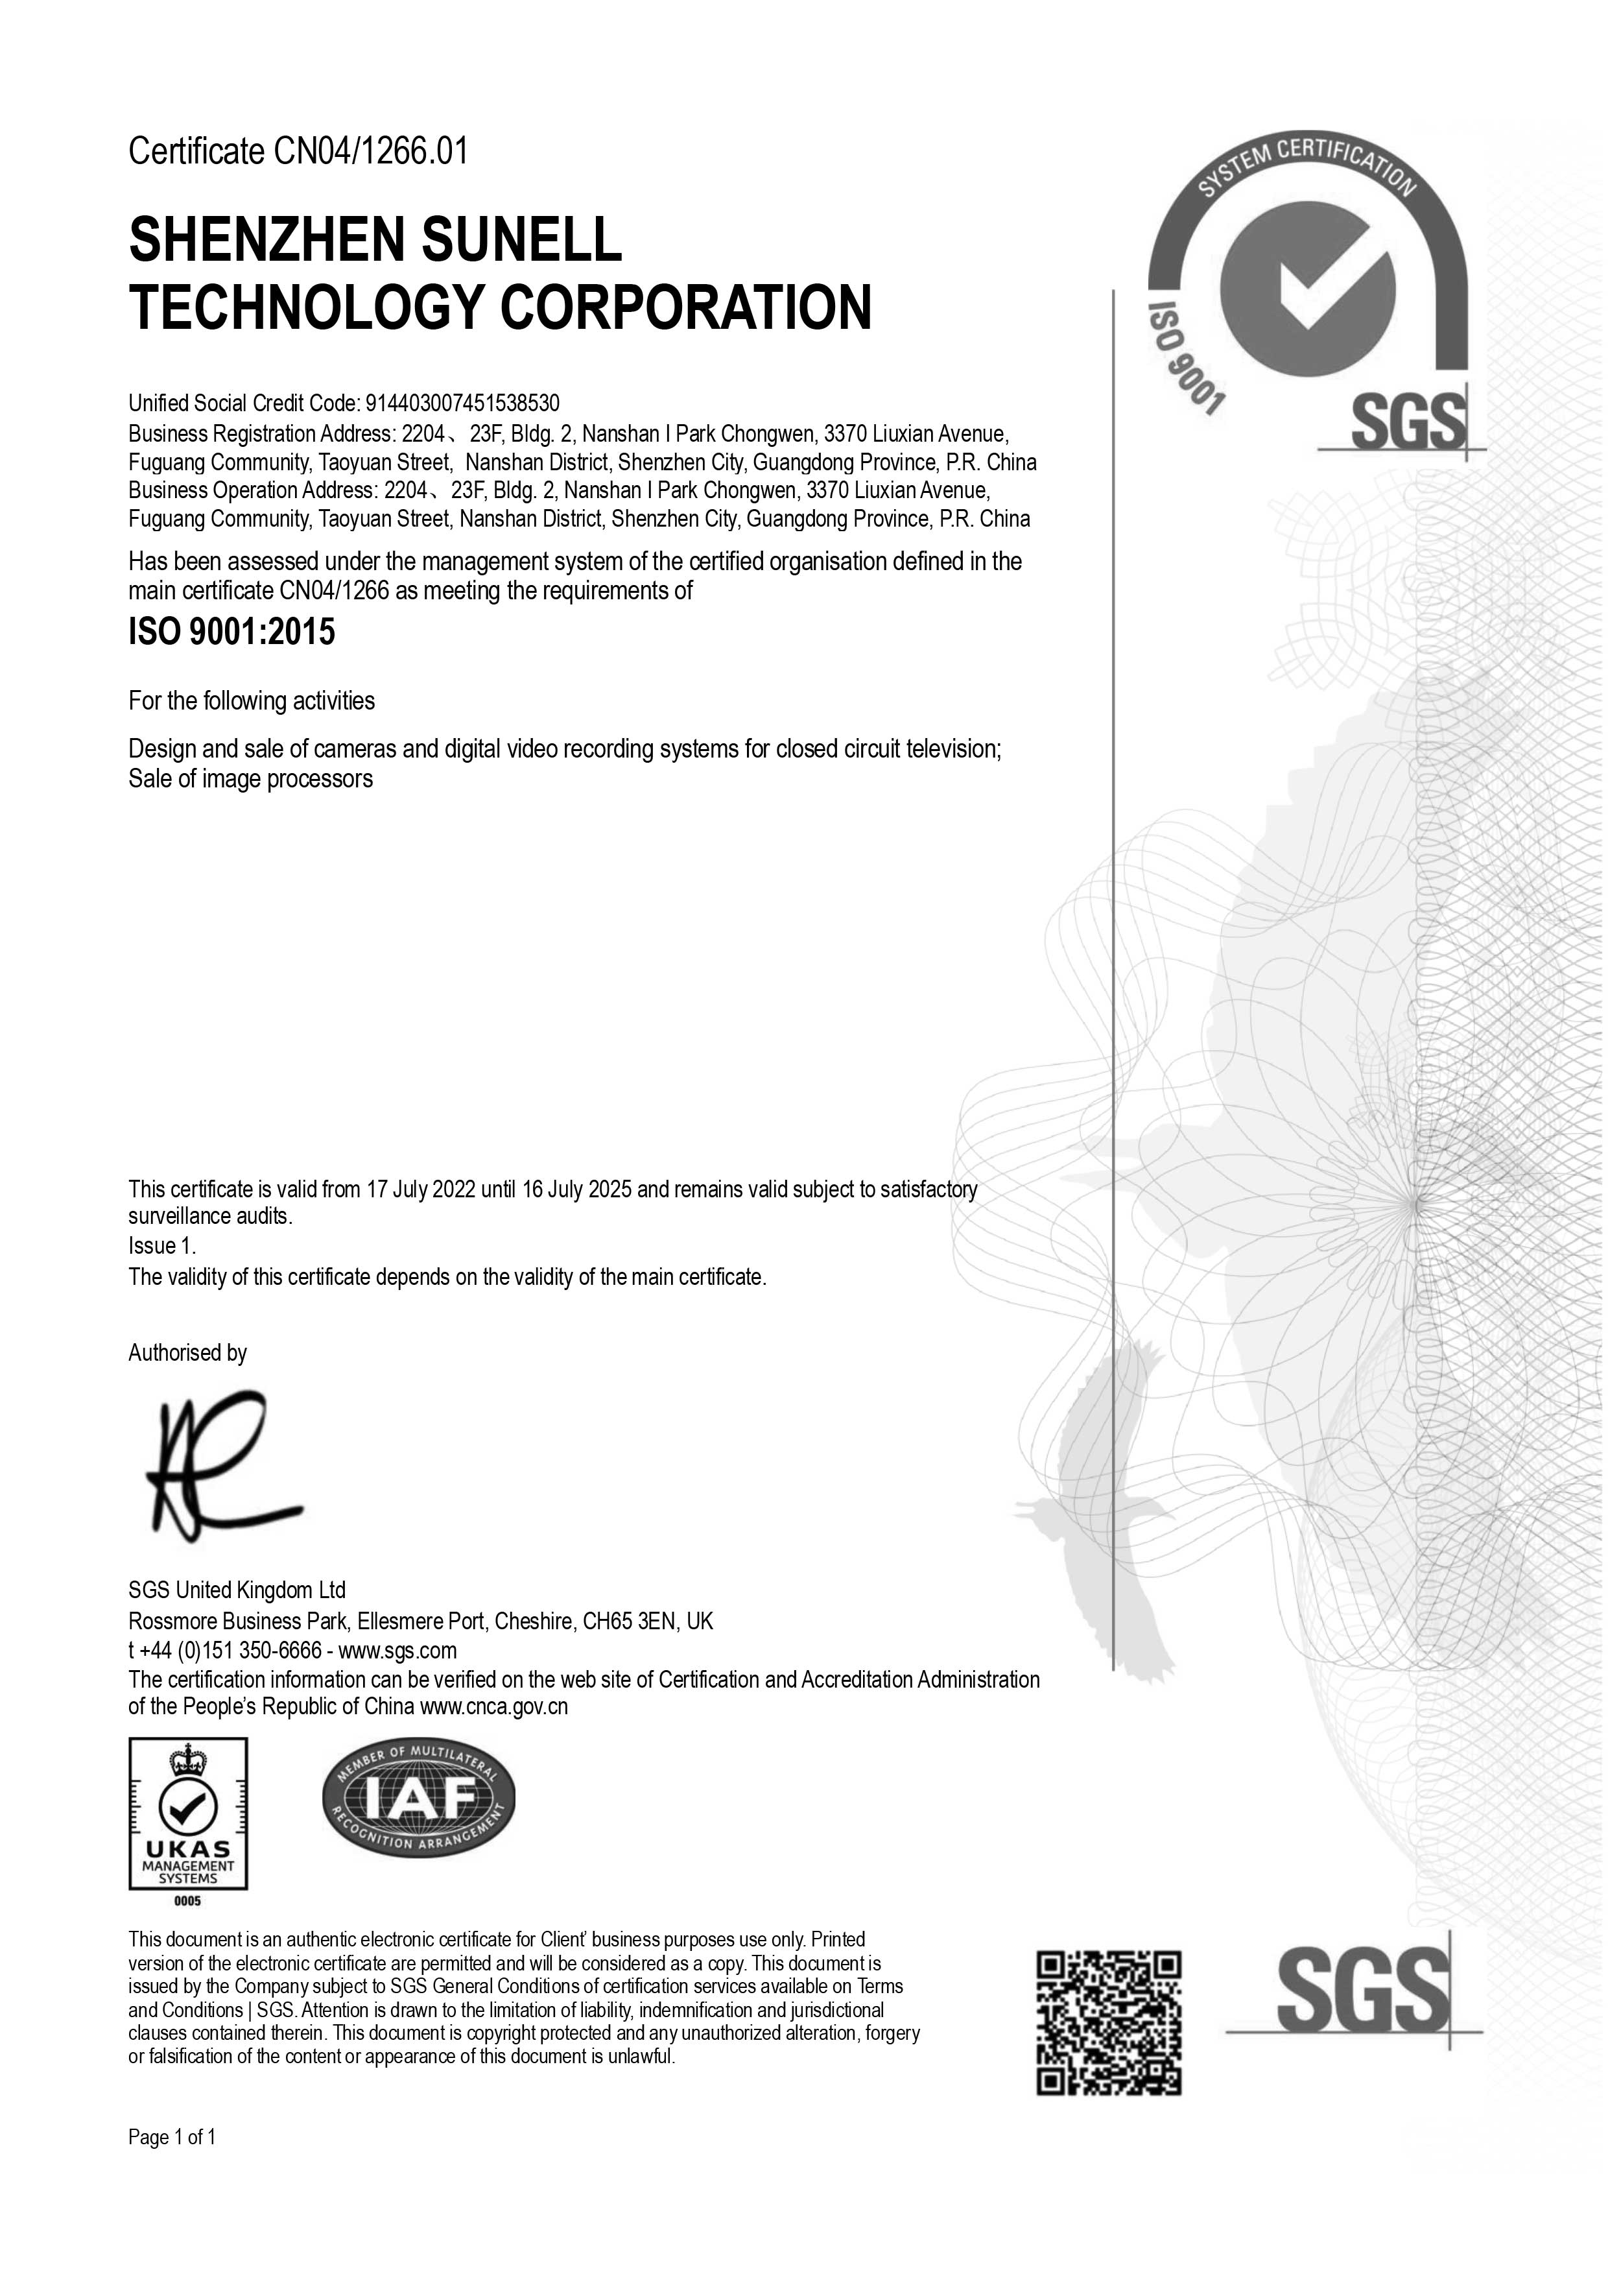 iso9001 quality system certificate